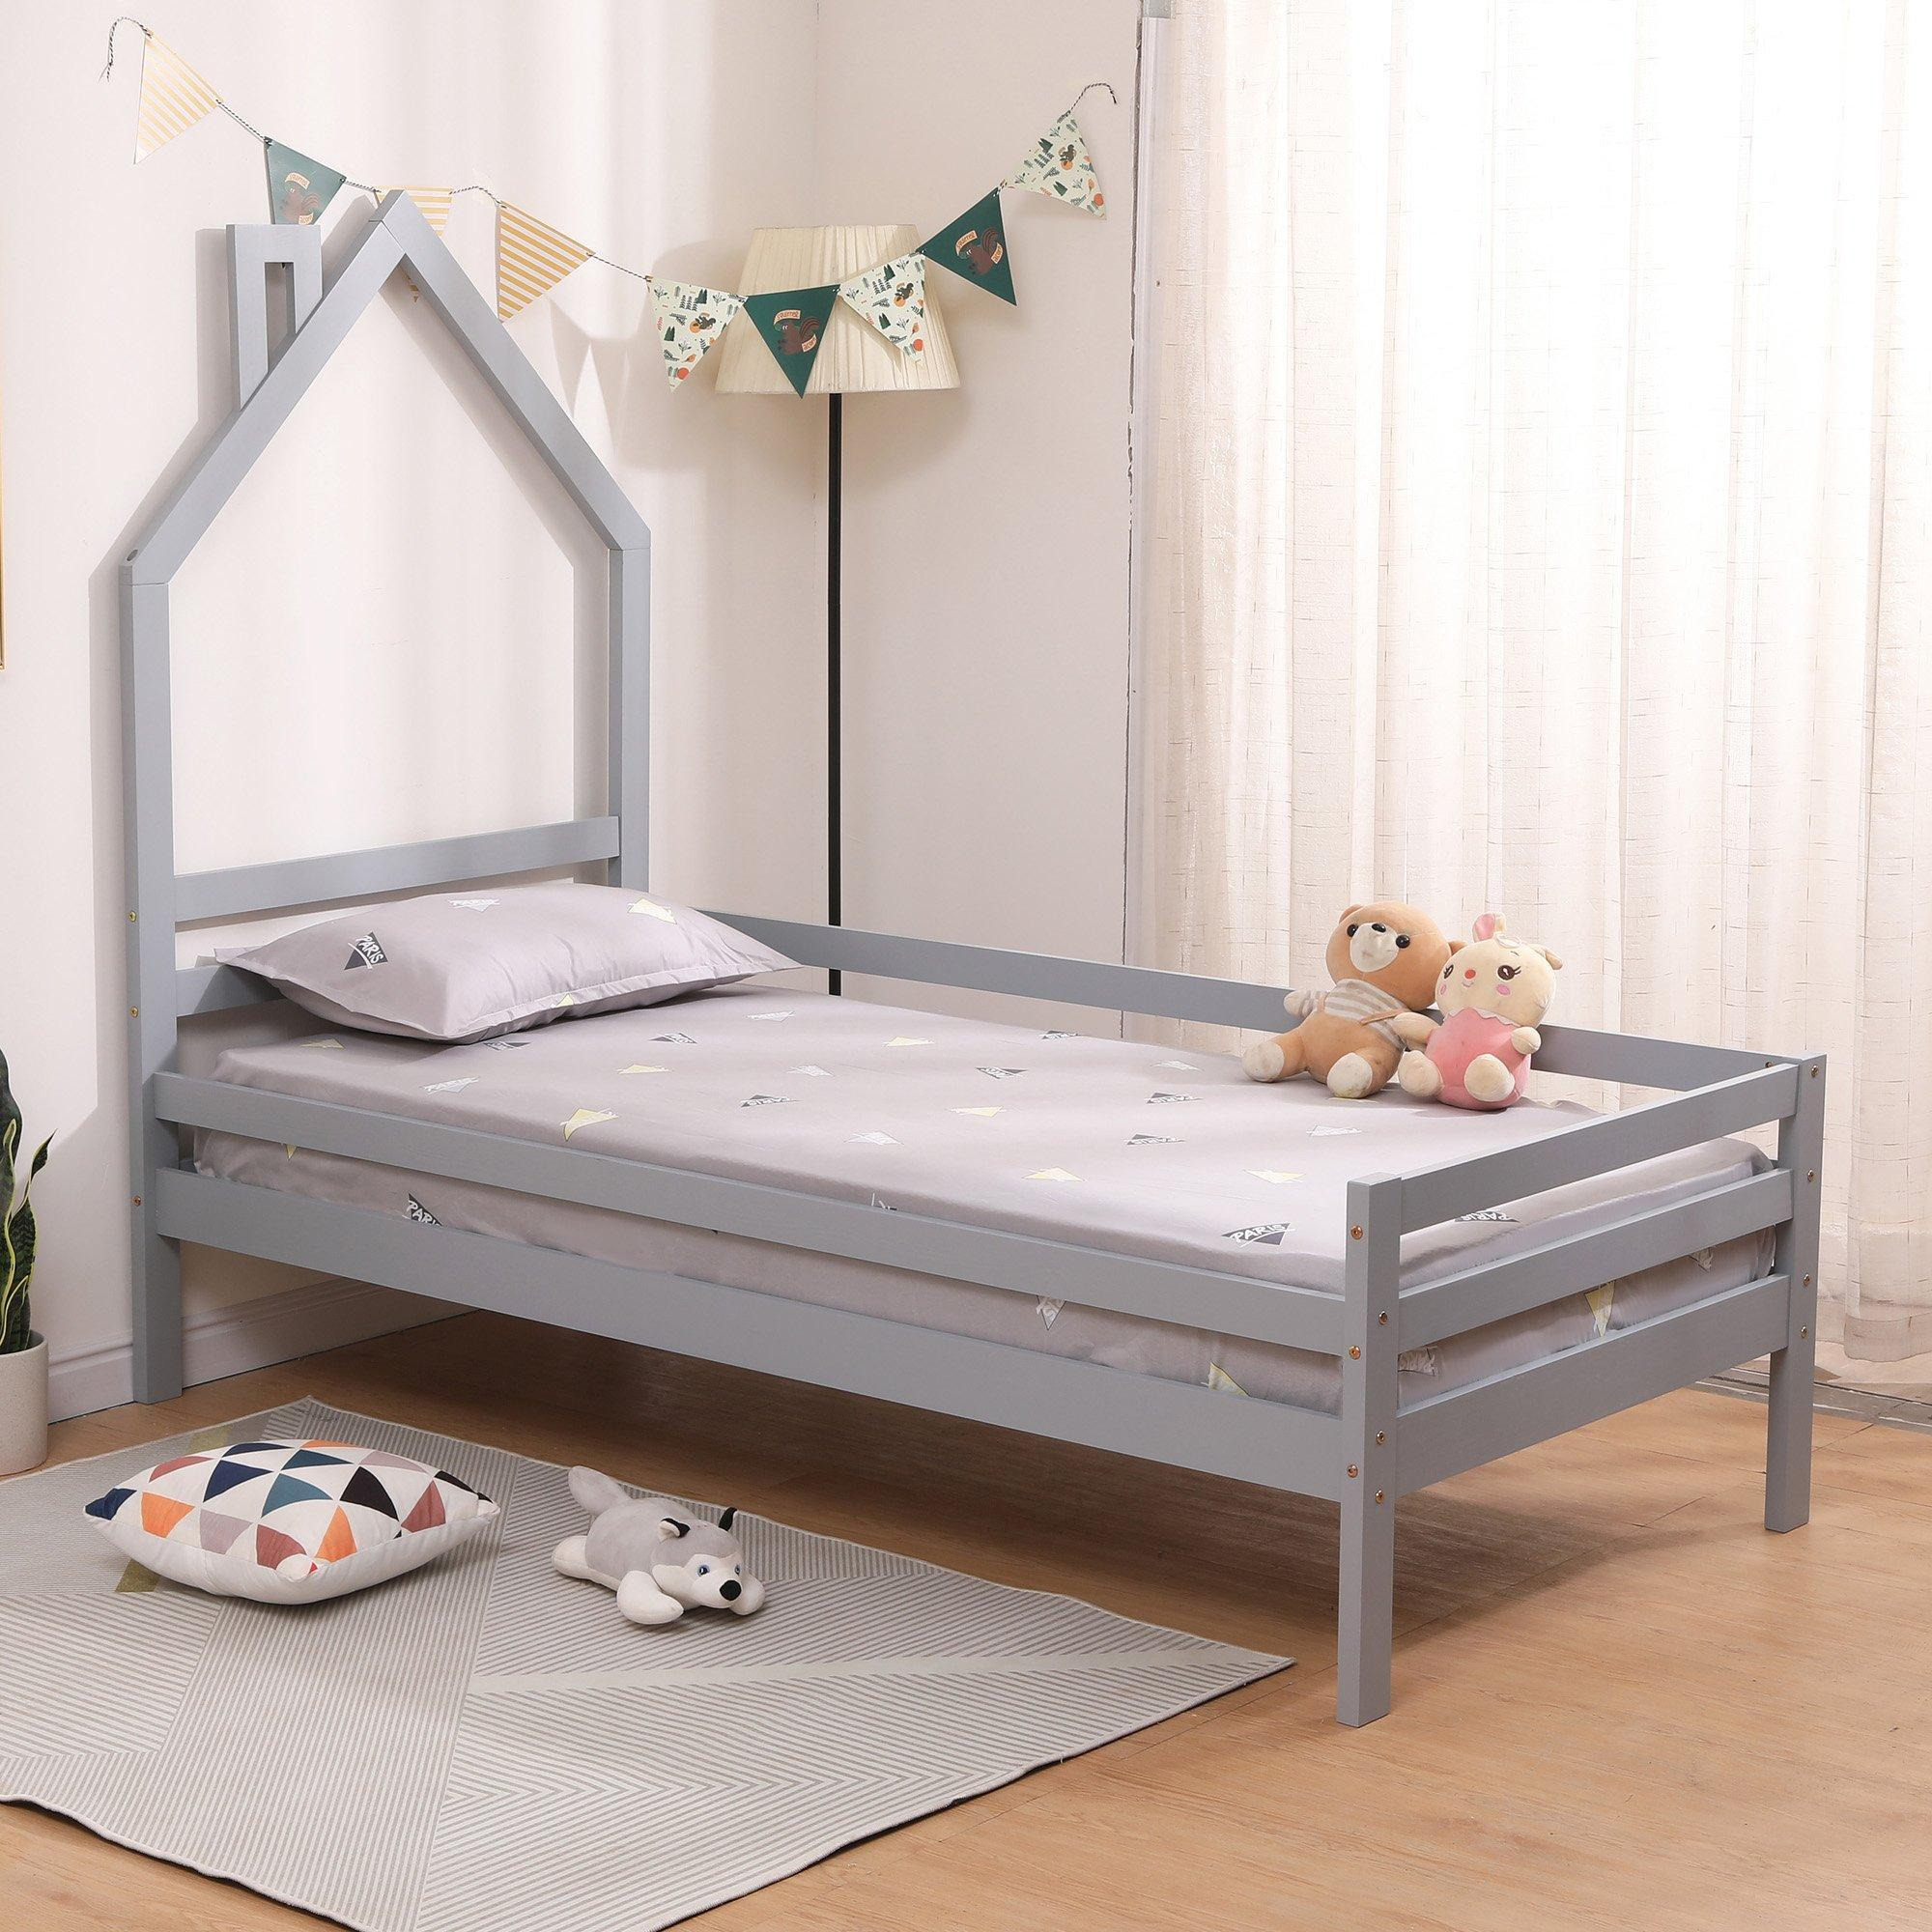 Theo Kids Childrens Wooden House Treehouse Style Single Bed Frame - image 1